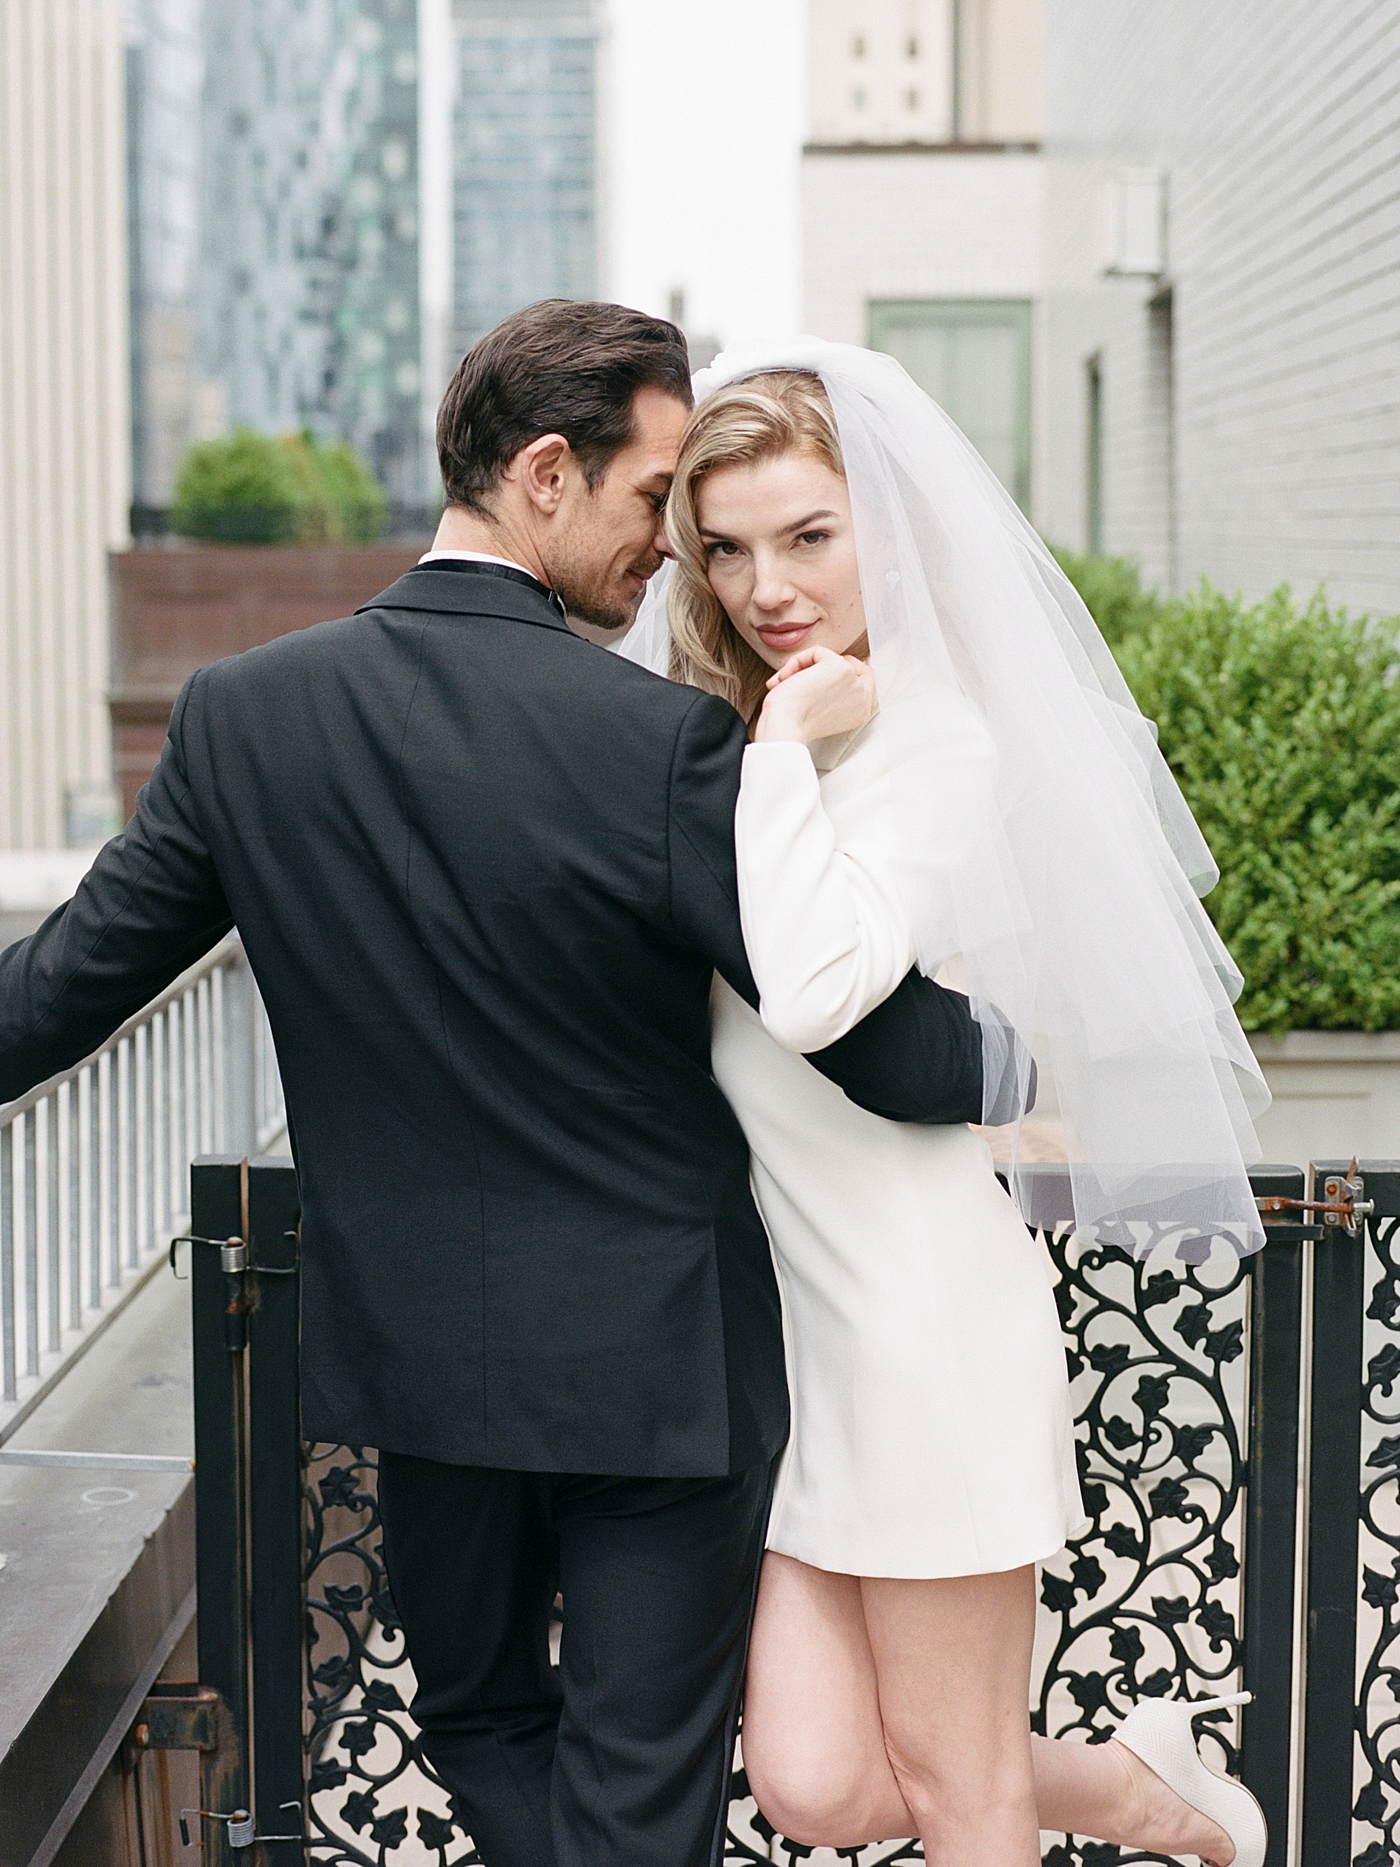 Bride and groom snuggling on a balcony | Photo by NYC Wedding Photographer Hope Helmuth 